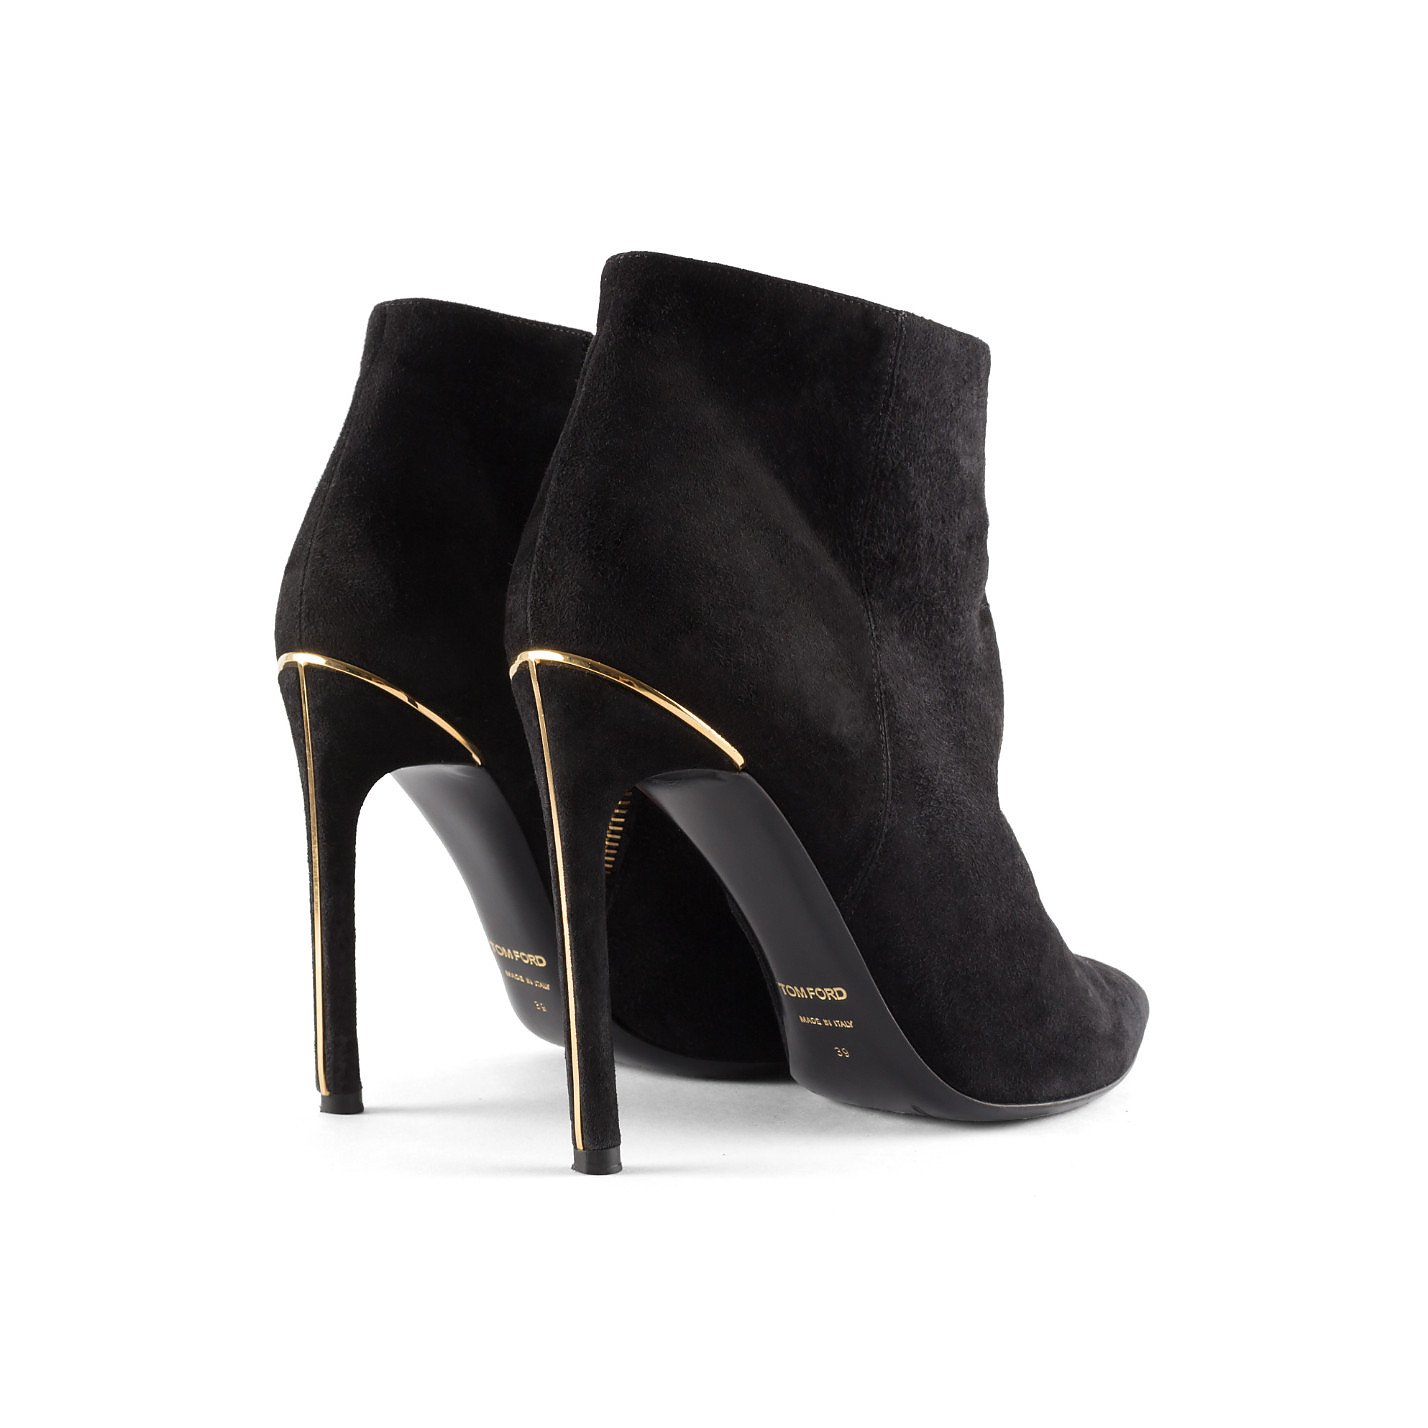 Tom Ford Suede Heeled Ankle Boots